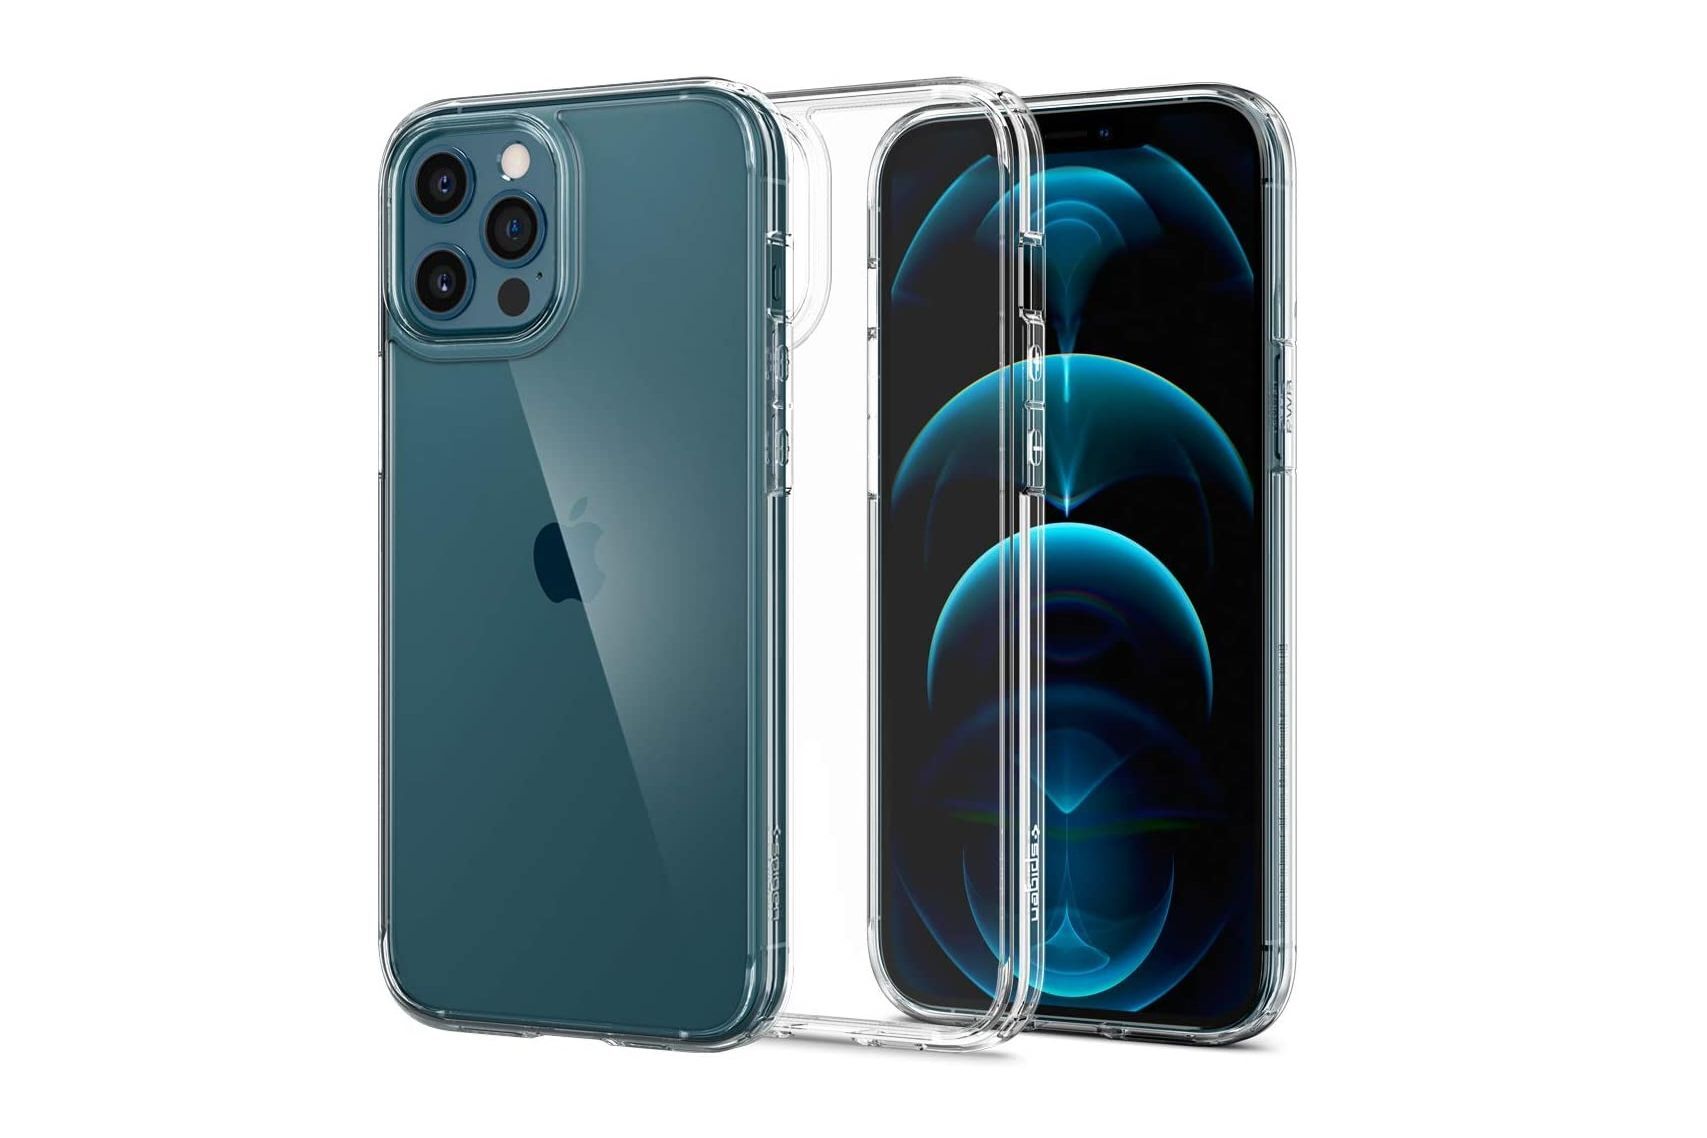 Spigen Ultra Hybrid iPhone 12 Pro Max case - The best iPhone 12 Pro Max cases in 2022 - updated October